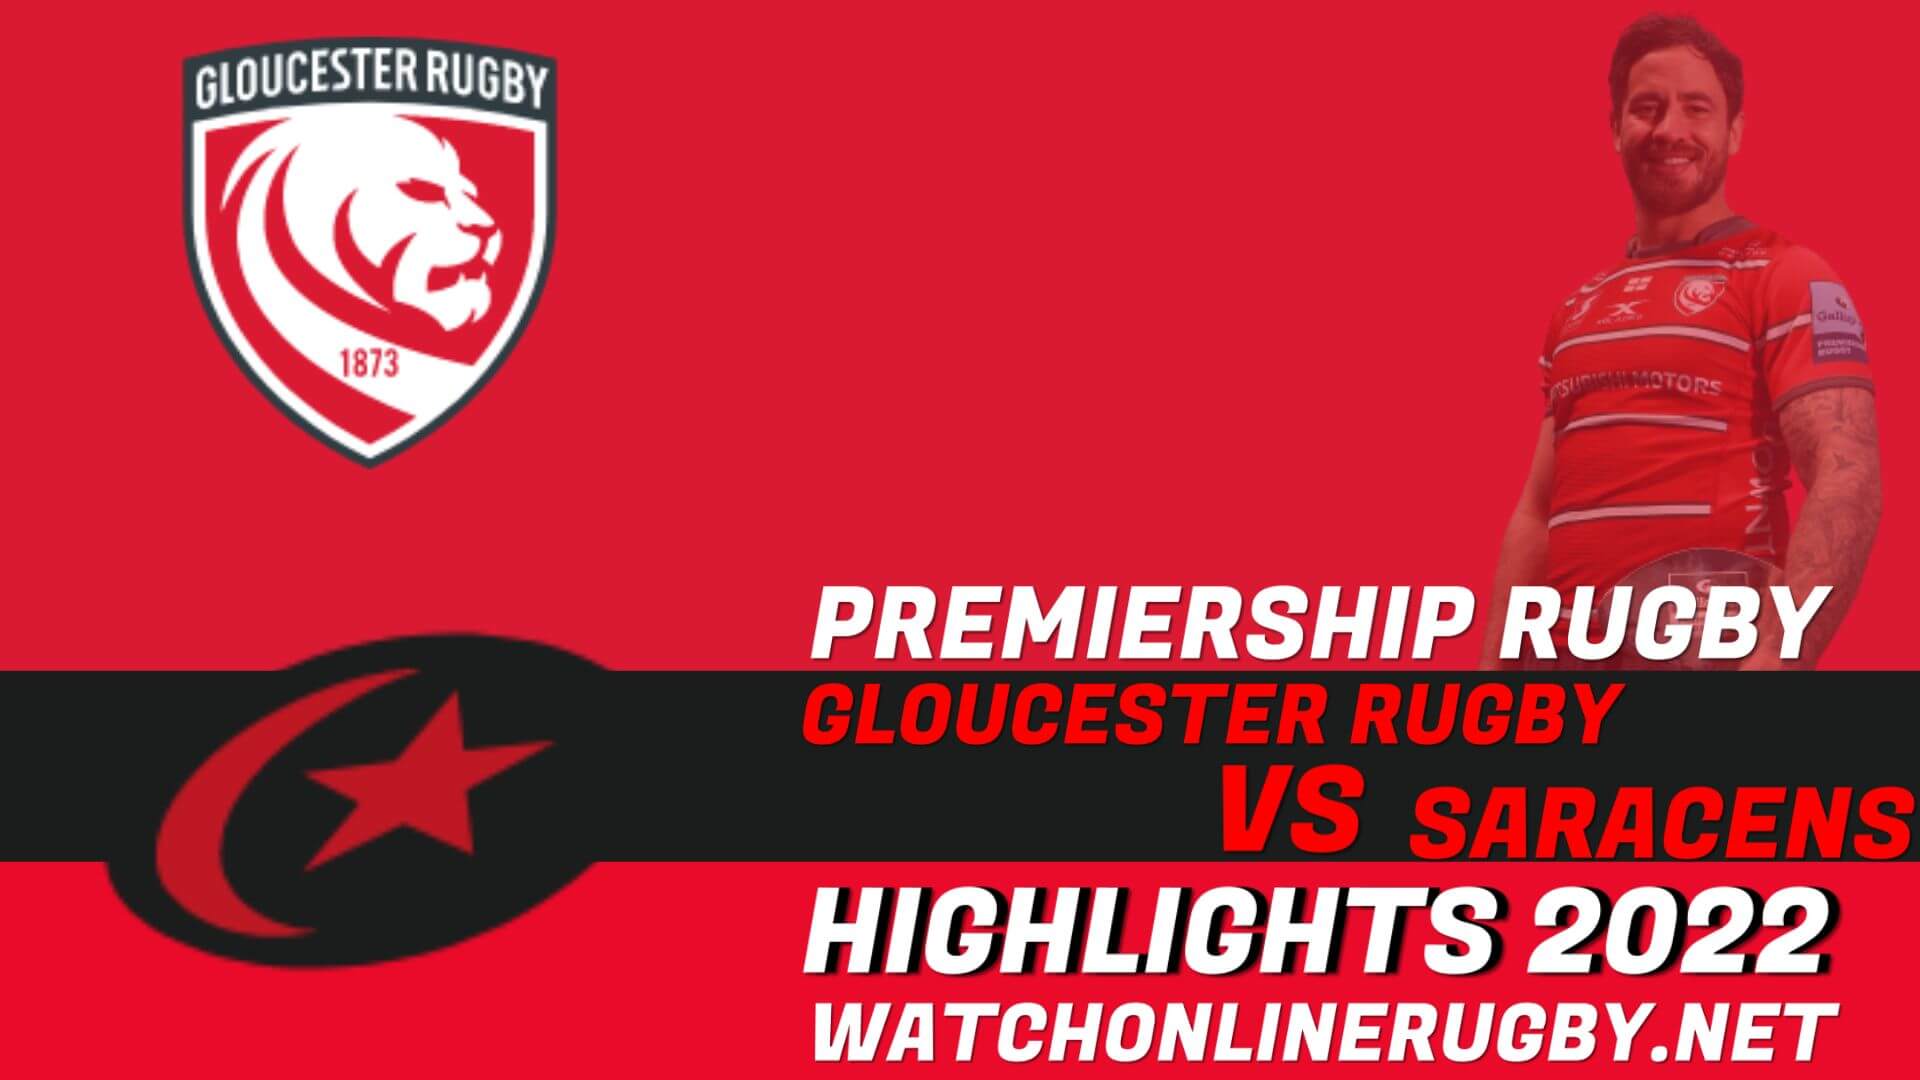 Gloucester Rugby Vs Saracens Premiership Rugby 2022 RD 26